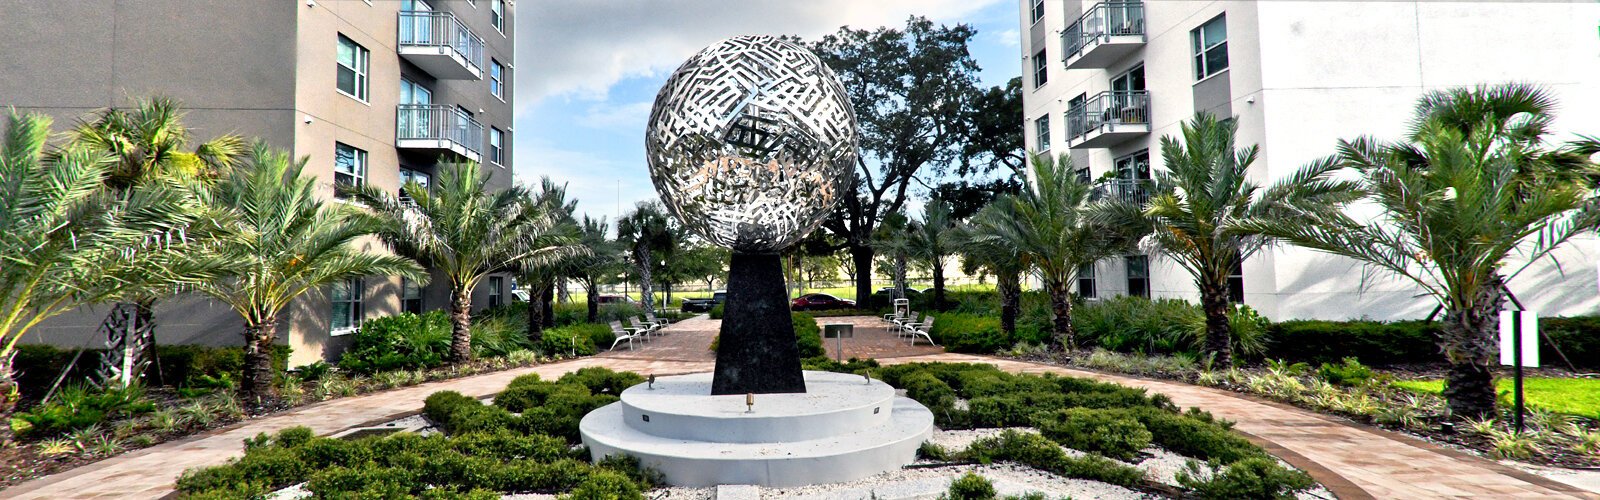 Situated in the center of the four Boulevard Towers, the West River Central Greenway Park is a family-friendly open area offering a place to relax and enjoy “Boulevard Flow," a beautiful sculpture by international artist and Tampa resident Ya La’ford